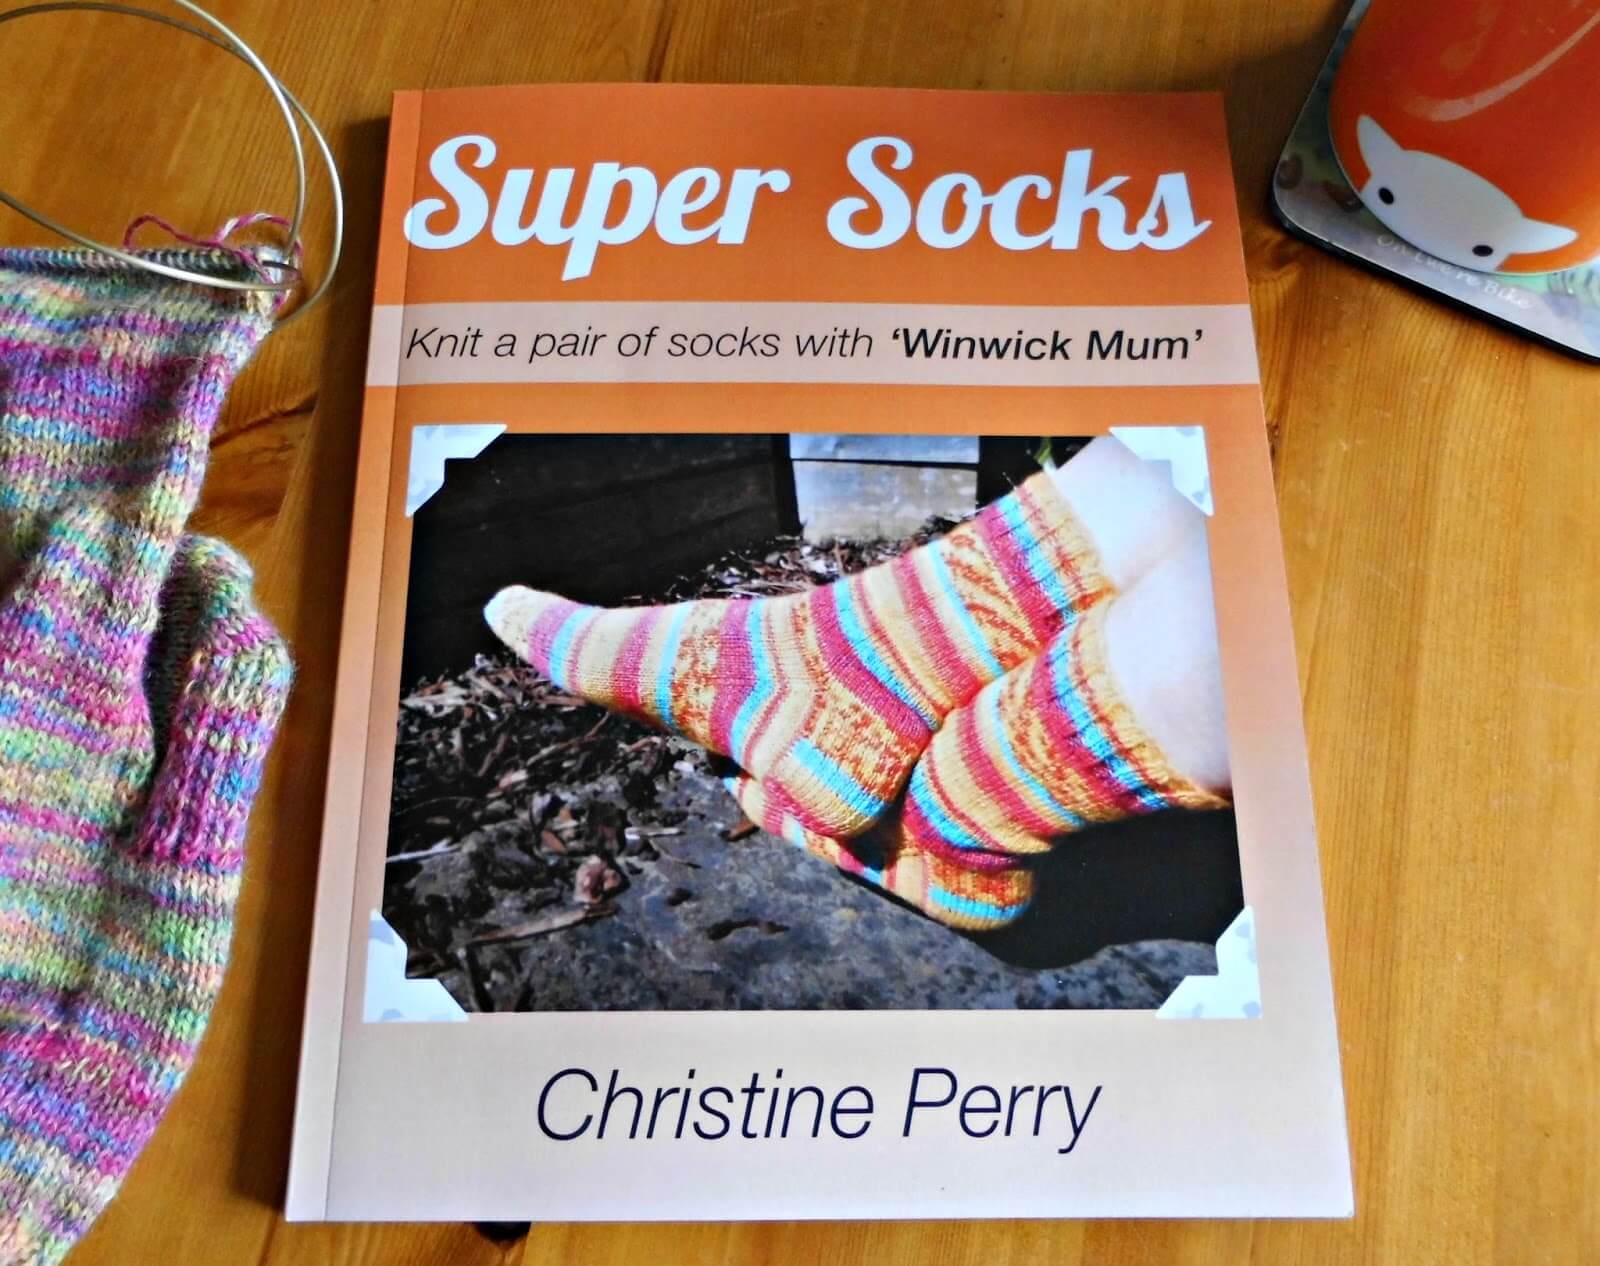 An orange Super Socks book lying on a wooden table. To the left is a partly knitted sock, to the right is an orange mug